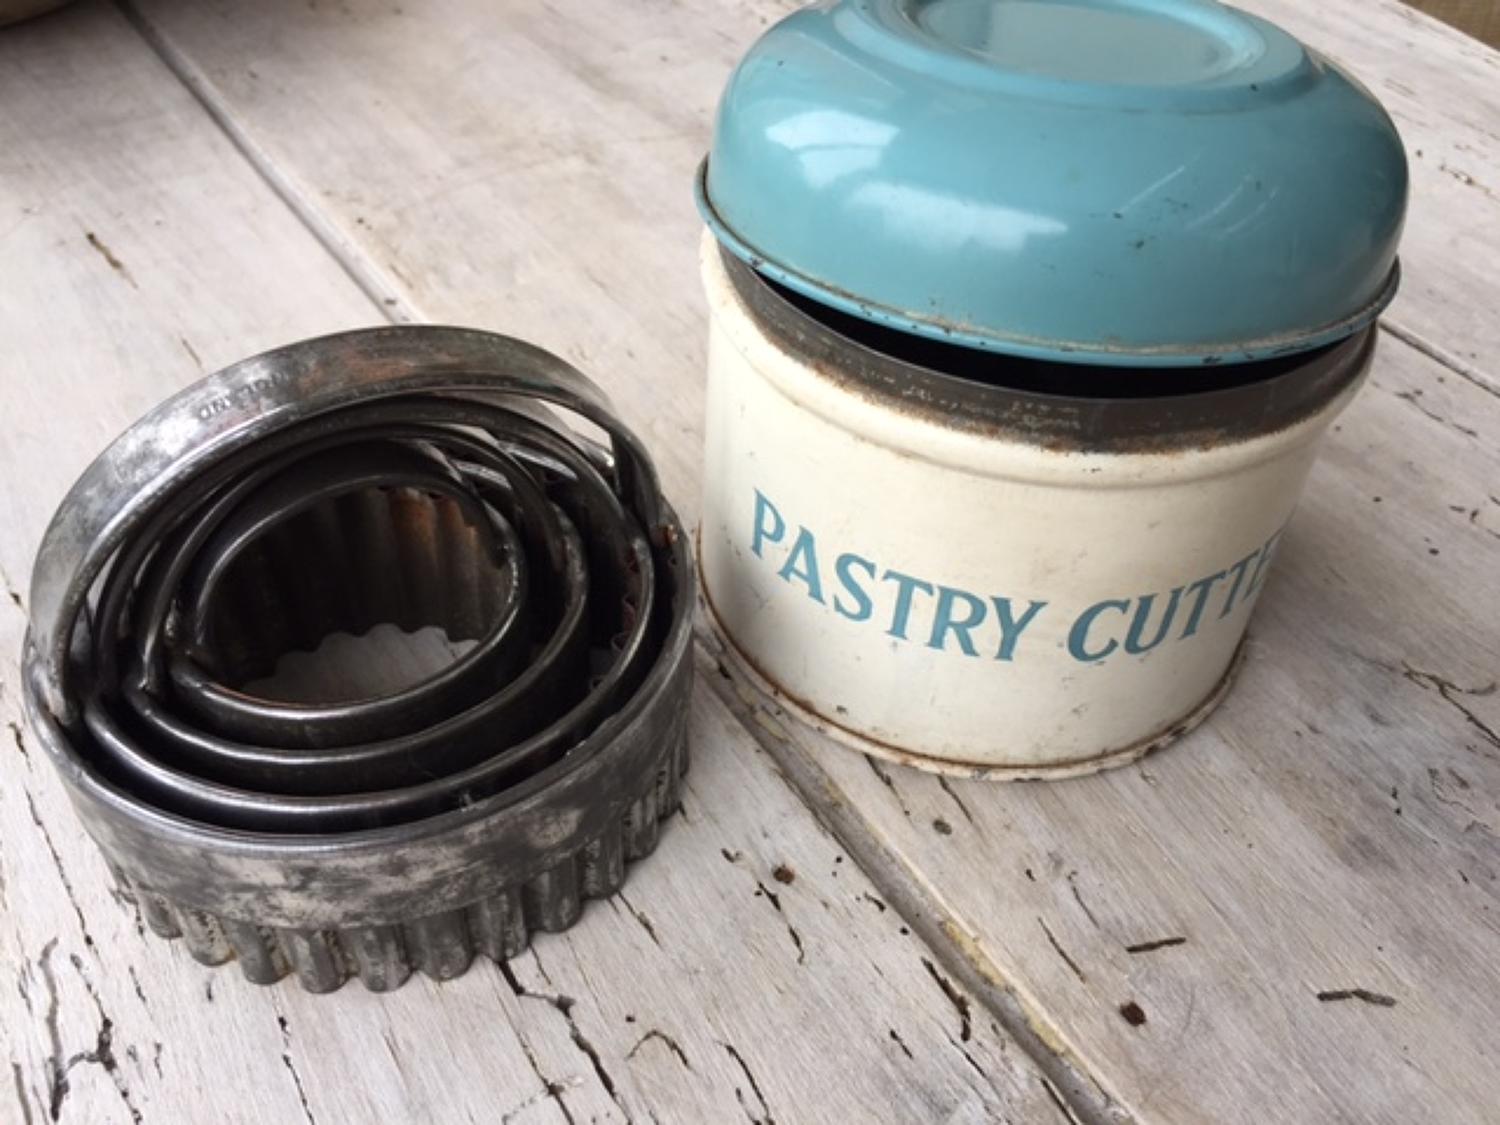 Vintage Tala Pastry Cutters